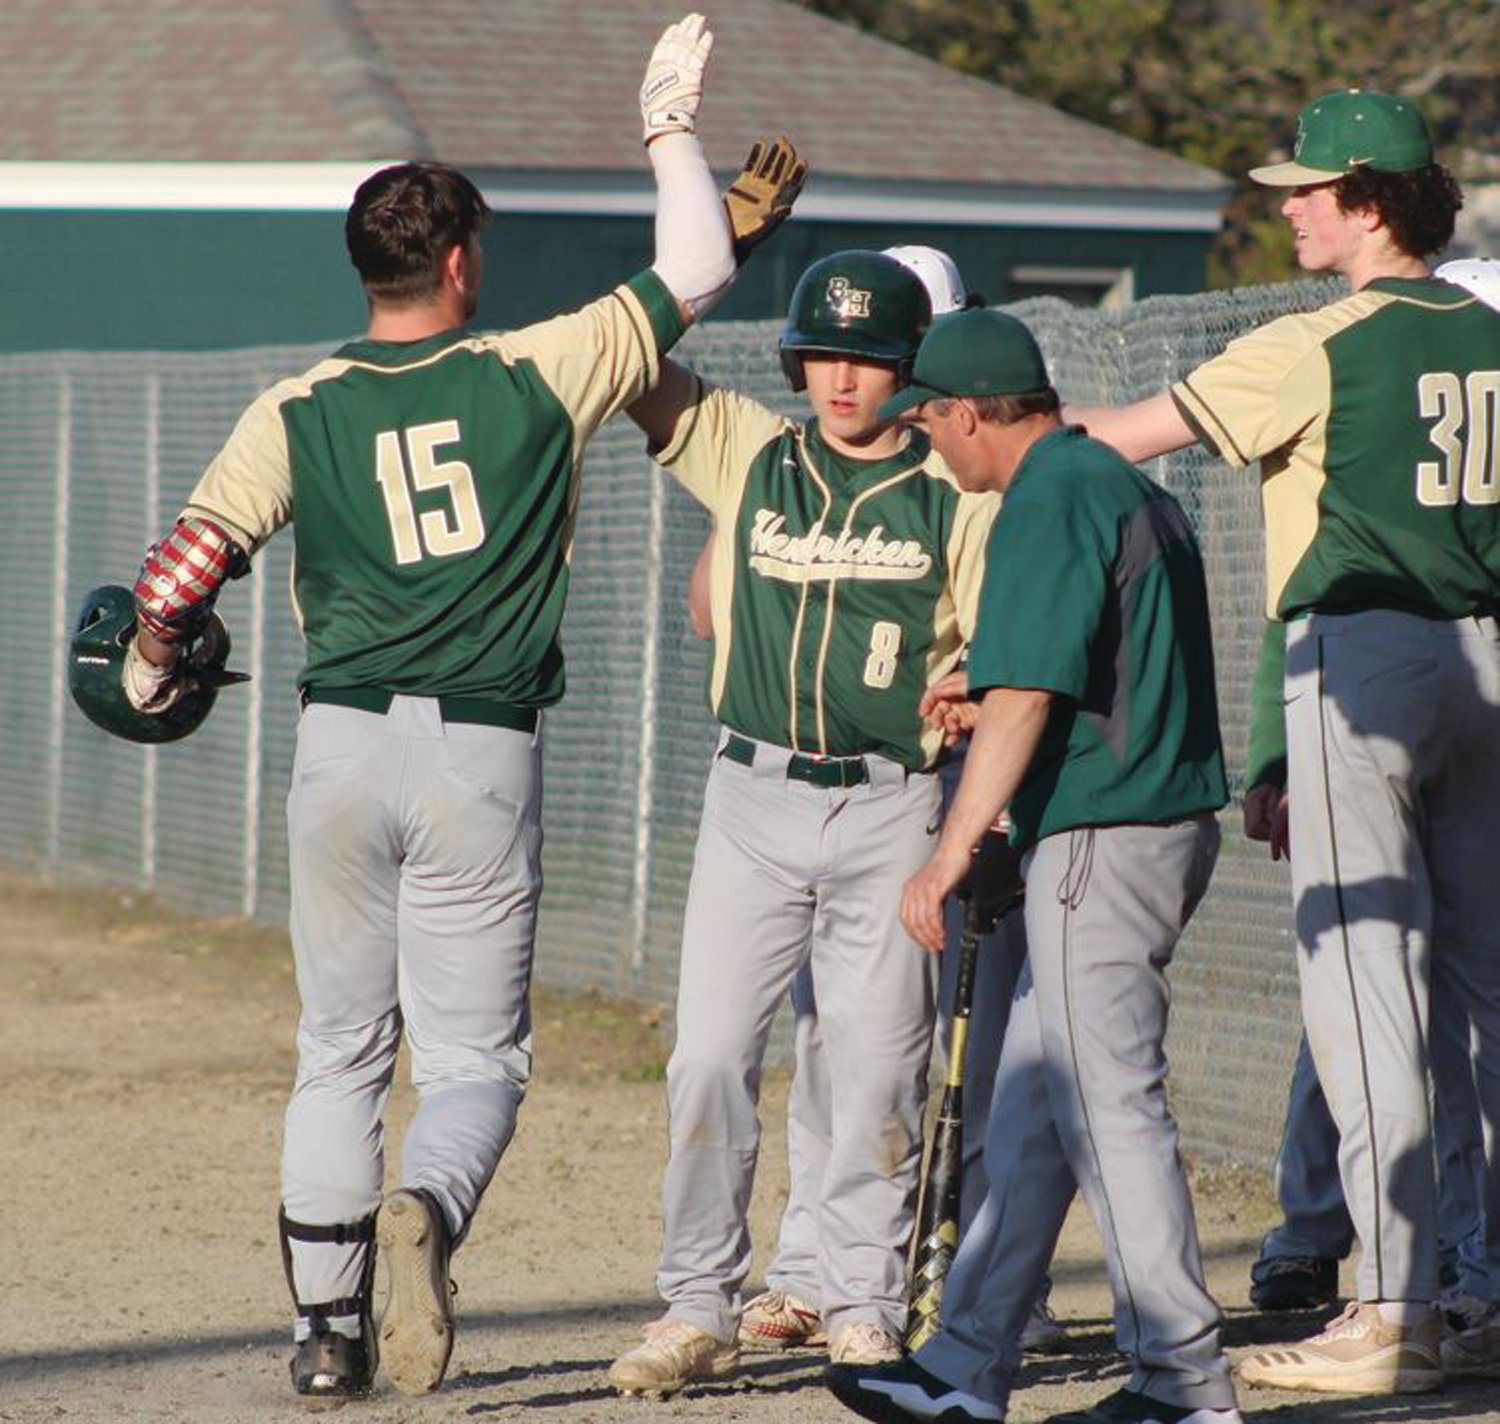 STAYING HOT: Hendricken players celebrate after a home run on Monday. (Photos by Alex Sponseller)